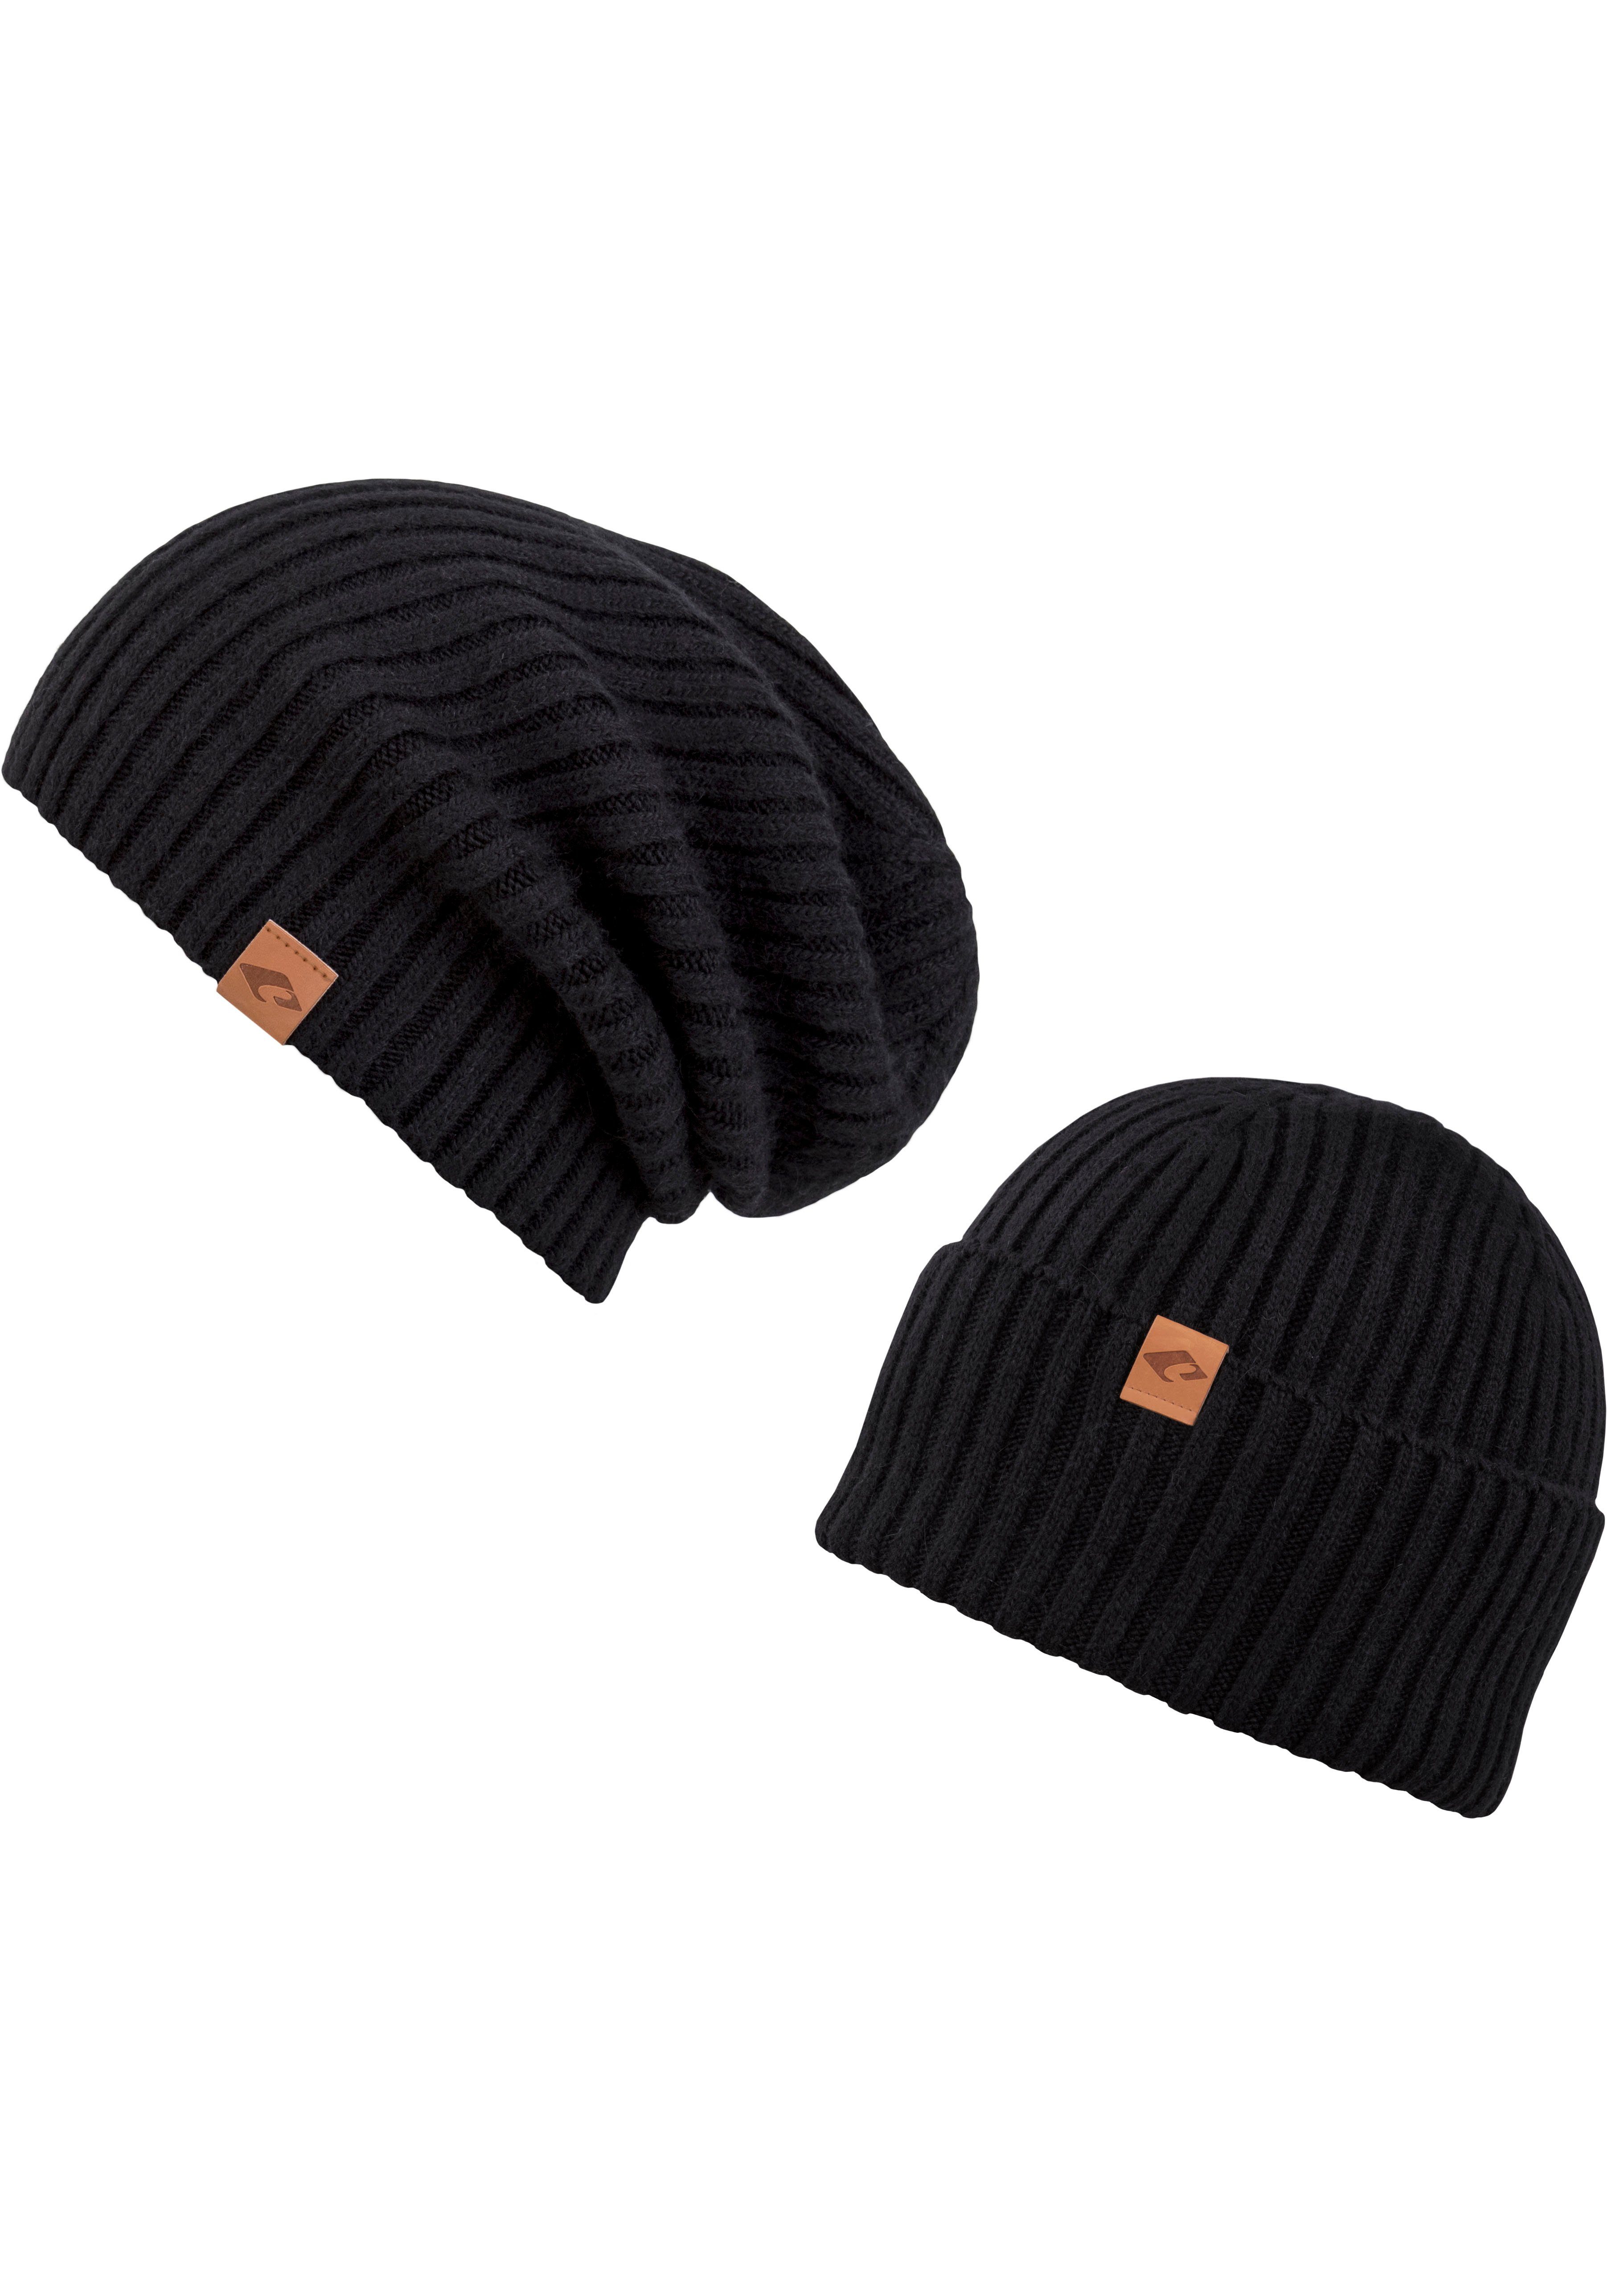 cm ca. Hat, flexibel Beanie One chillouts Justin ) 58-62 Size (